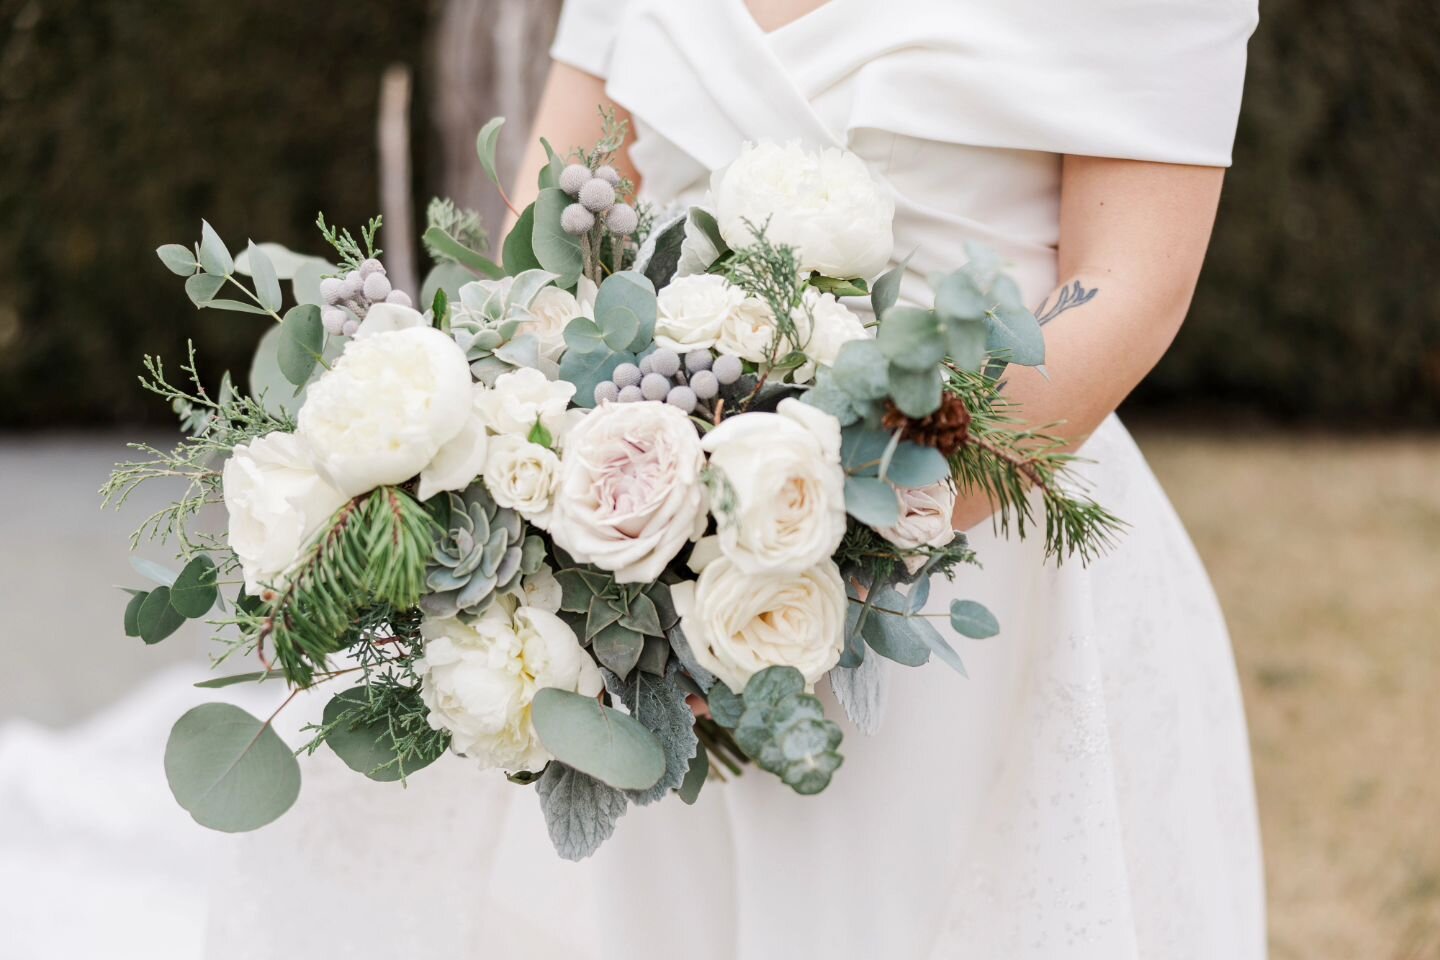 Succulents, roses in blush and white, and eucalyptus!?! Oh my! When we say bespoke florals, we mean it. And we certainly flexed our creative muscle with this absolutely stunning bouquet inspired by our Brides' favorite plants and greenery. What do yo